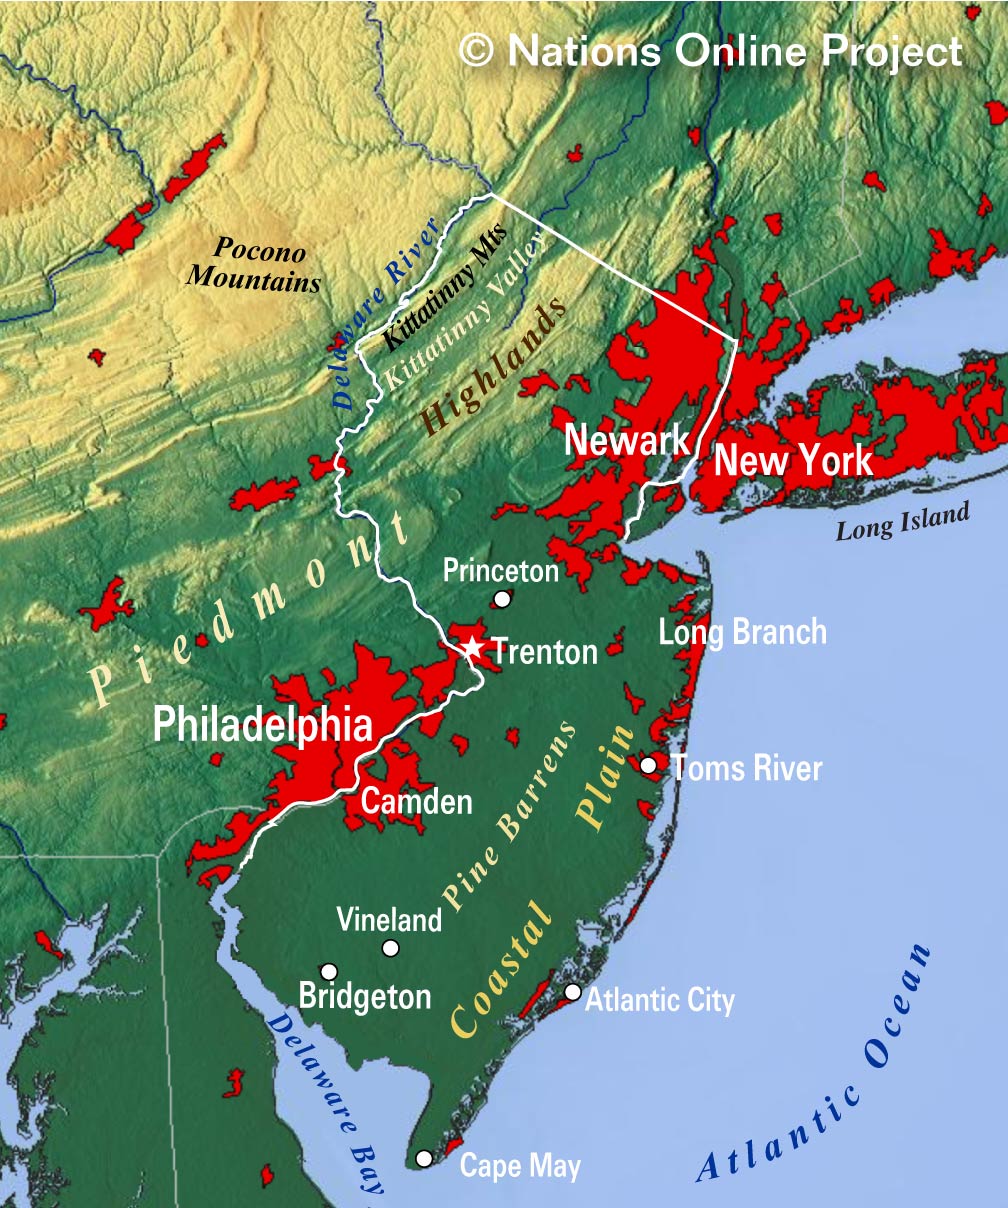 long Shipley Nat Map of the State of New Jersey, USA - Nations Online Project